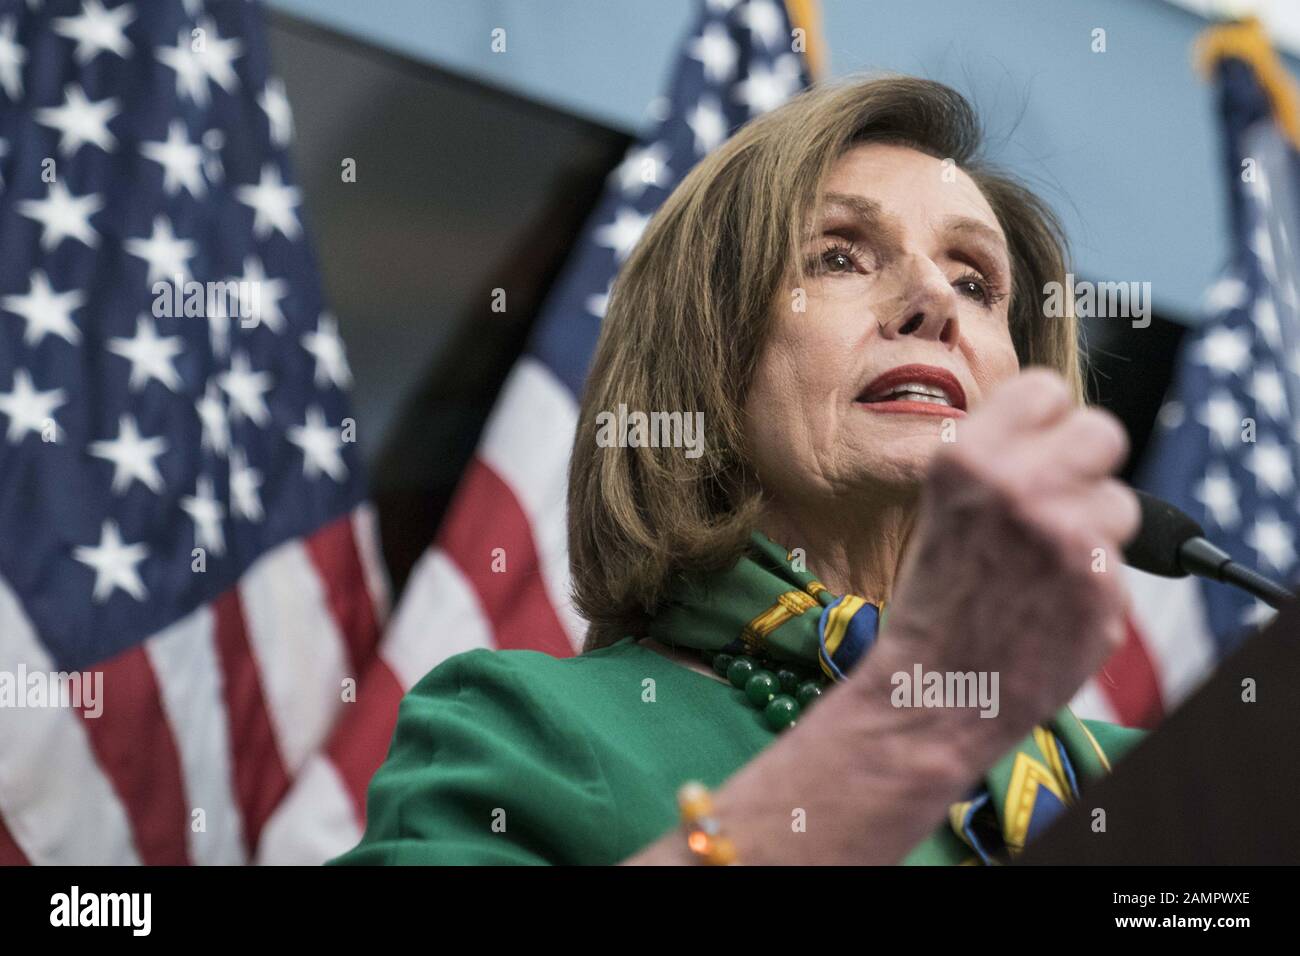 Washington, United States. 14th Jan, 2020. Speaker of the House Nancy Pelosi, D-Calif., speaks during a press conference marking the ten year anniversary of the Citizens United Decision in the U.S Capitol in Washington, DC on Tuesday, January 14, 2020. It was announced earlier today that House Democrats plan to vote Wednesday to send two articles of impeachment against President Donald Trump to the Senate and to appoint managers for his trial. Photo by Sarah Silbiger/UPI Credit: UPI/Alamy Live News Stock Photo